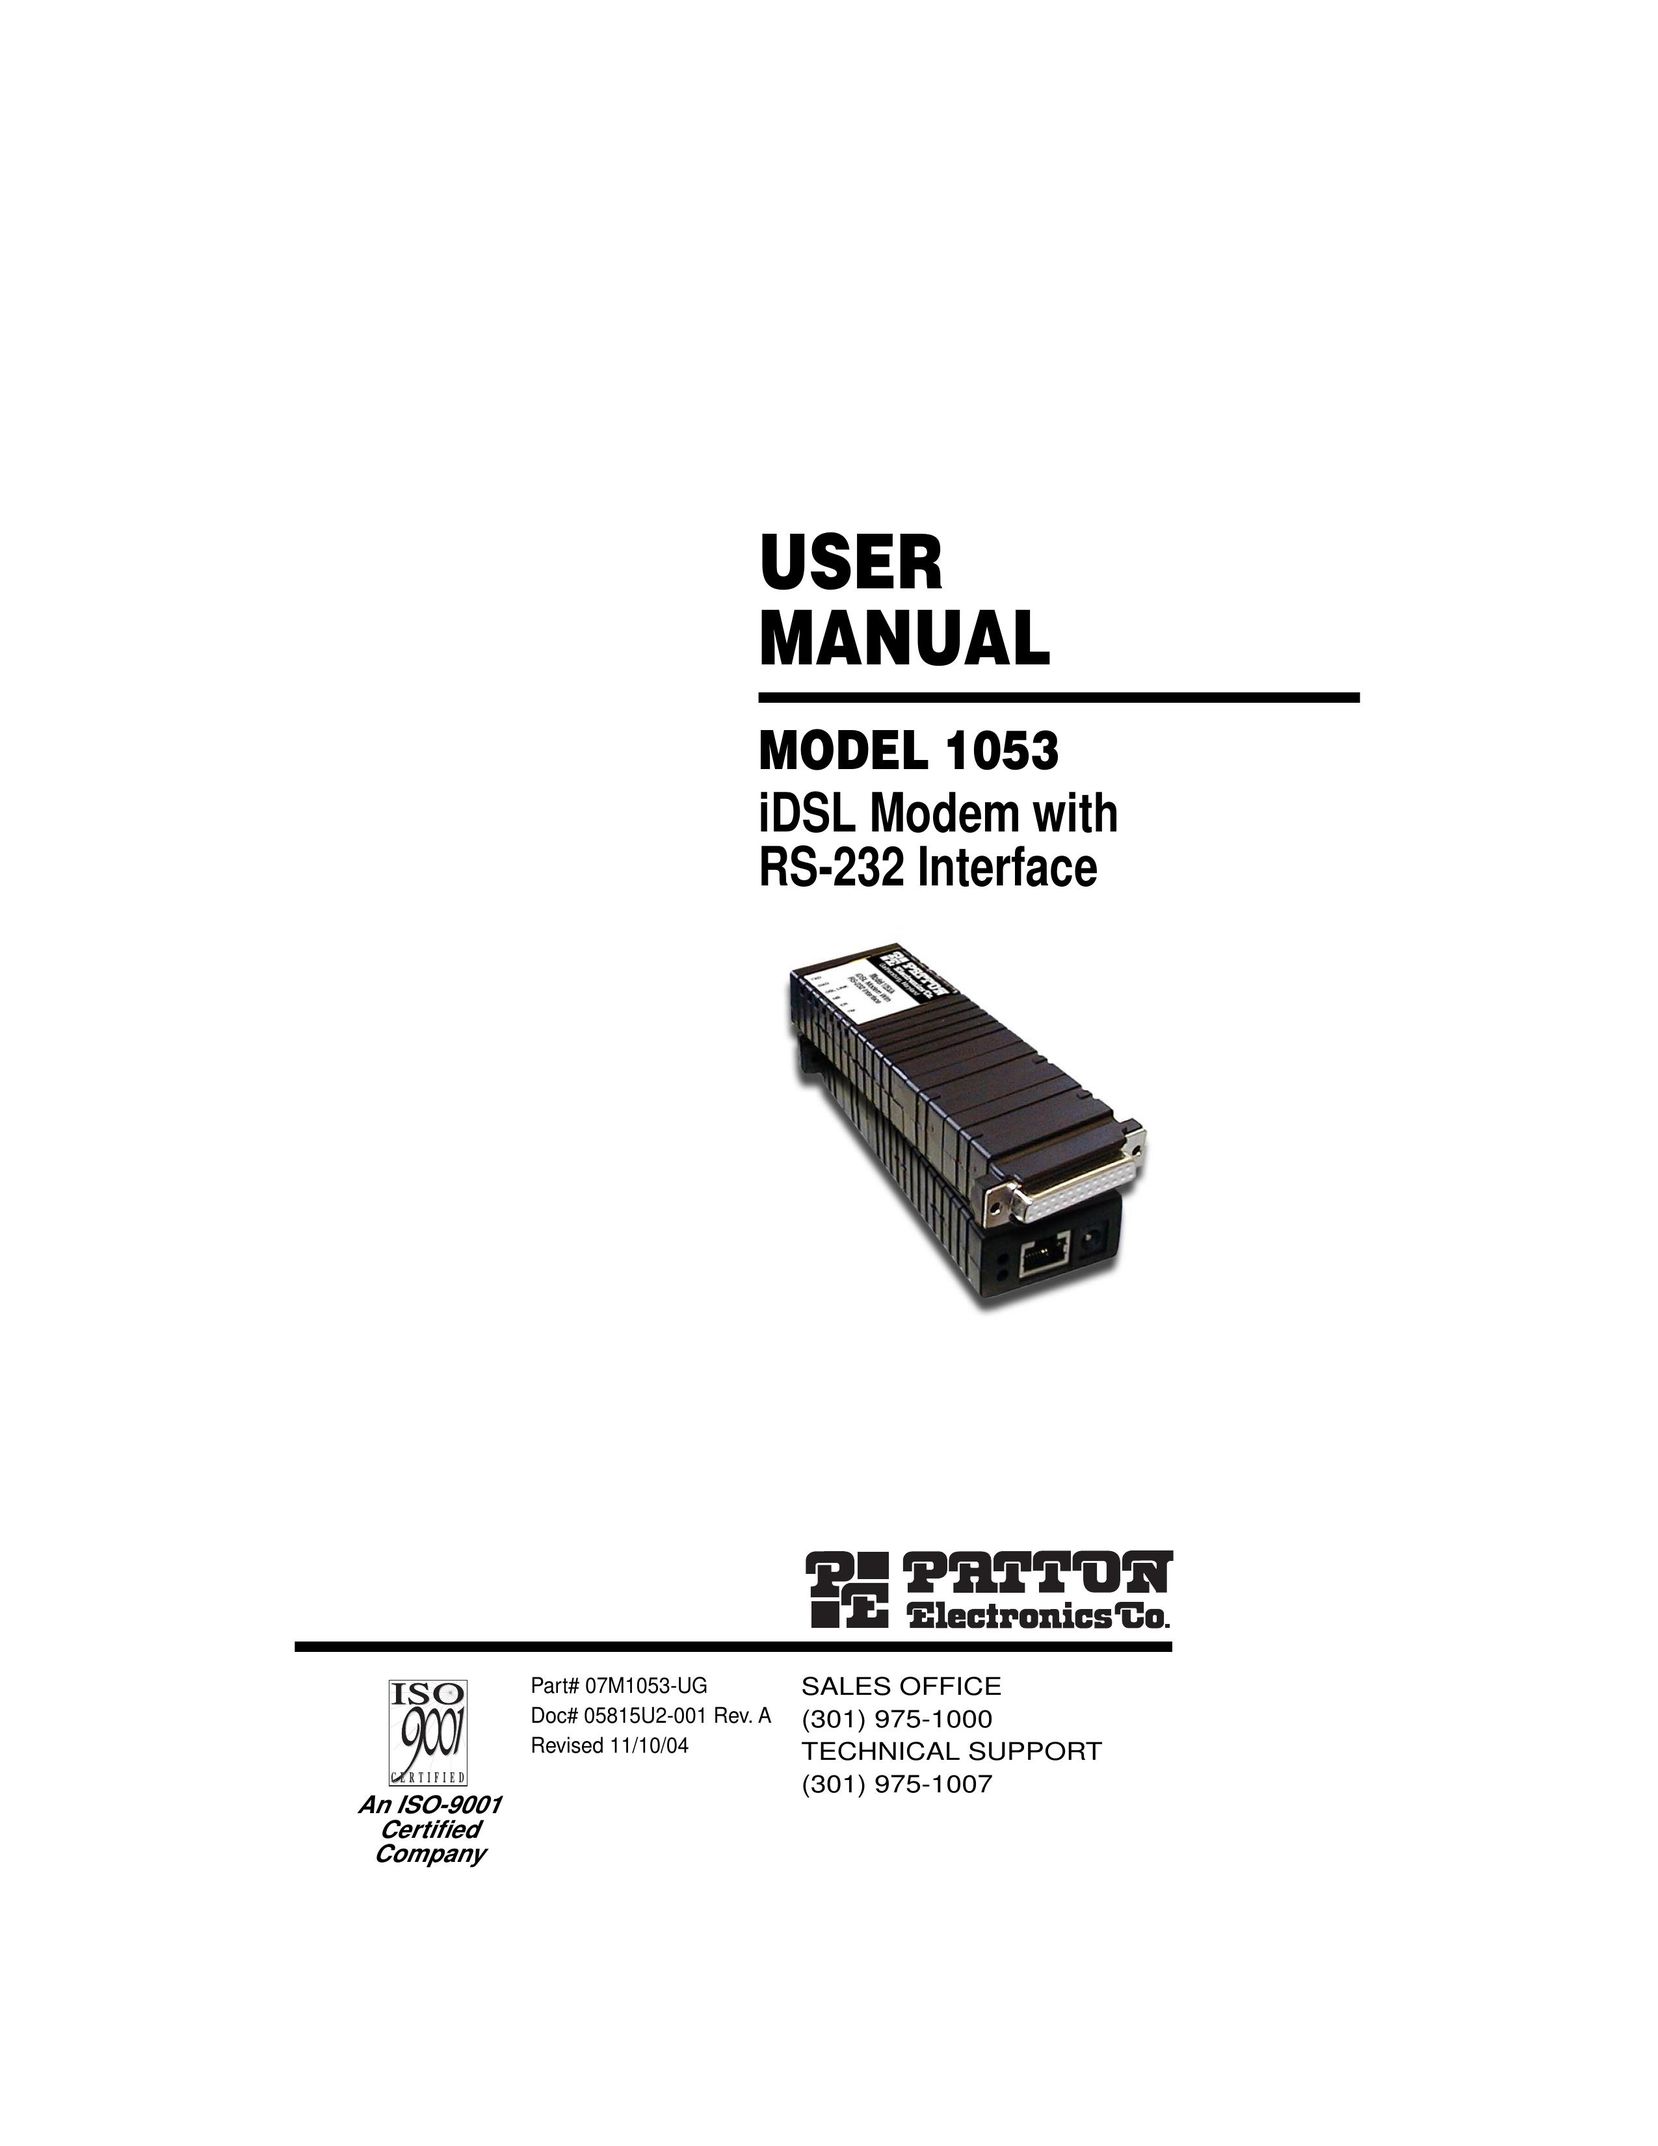 Patton electronic 1053 Network Card User Manual (Page 1)